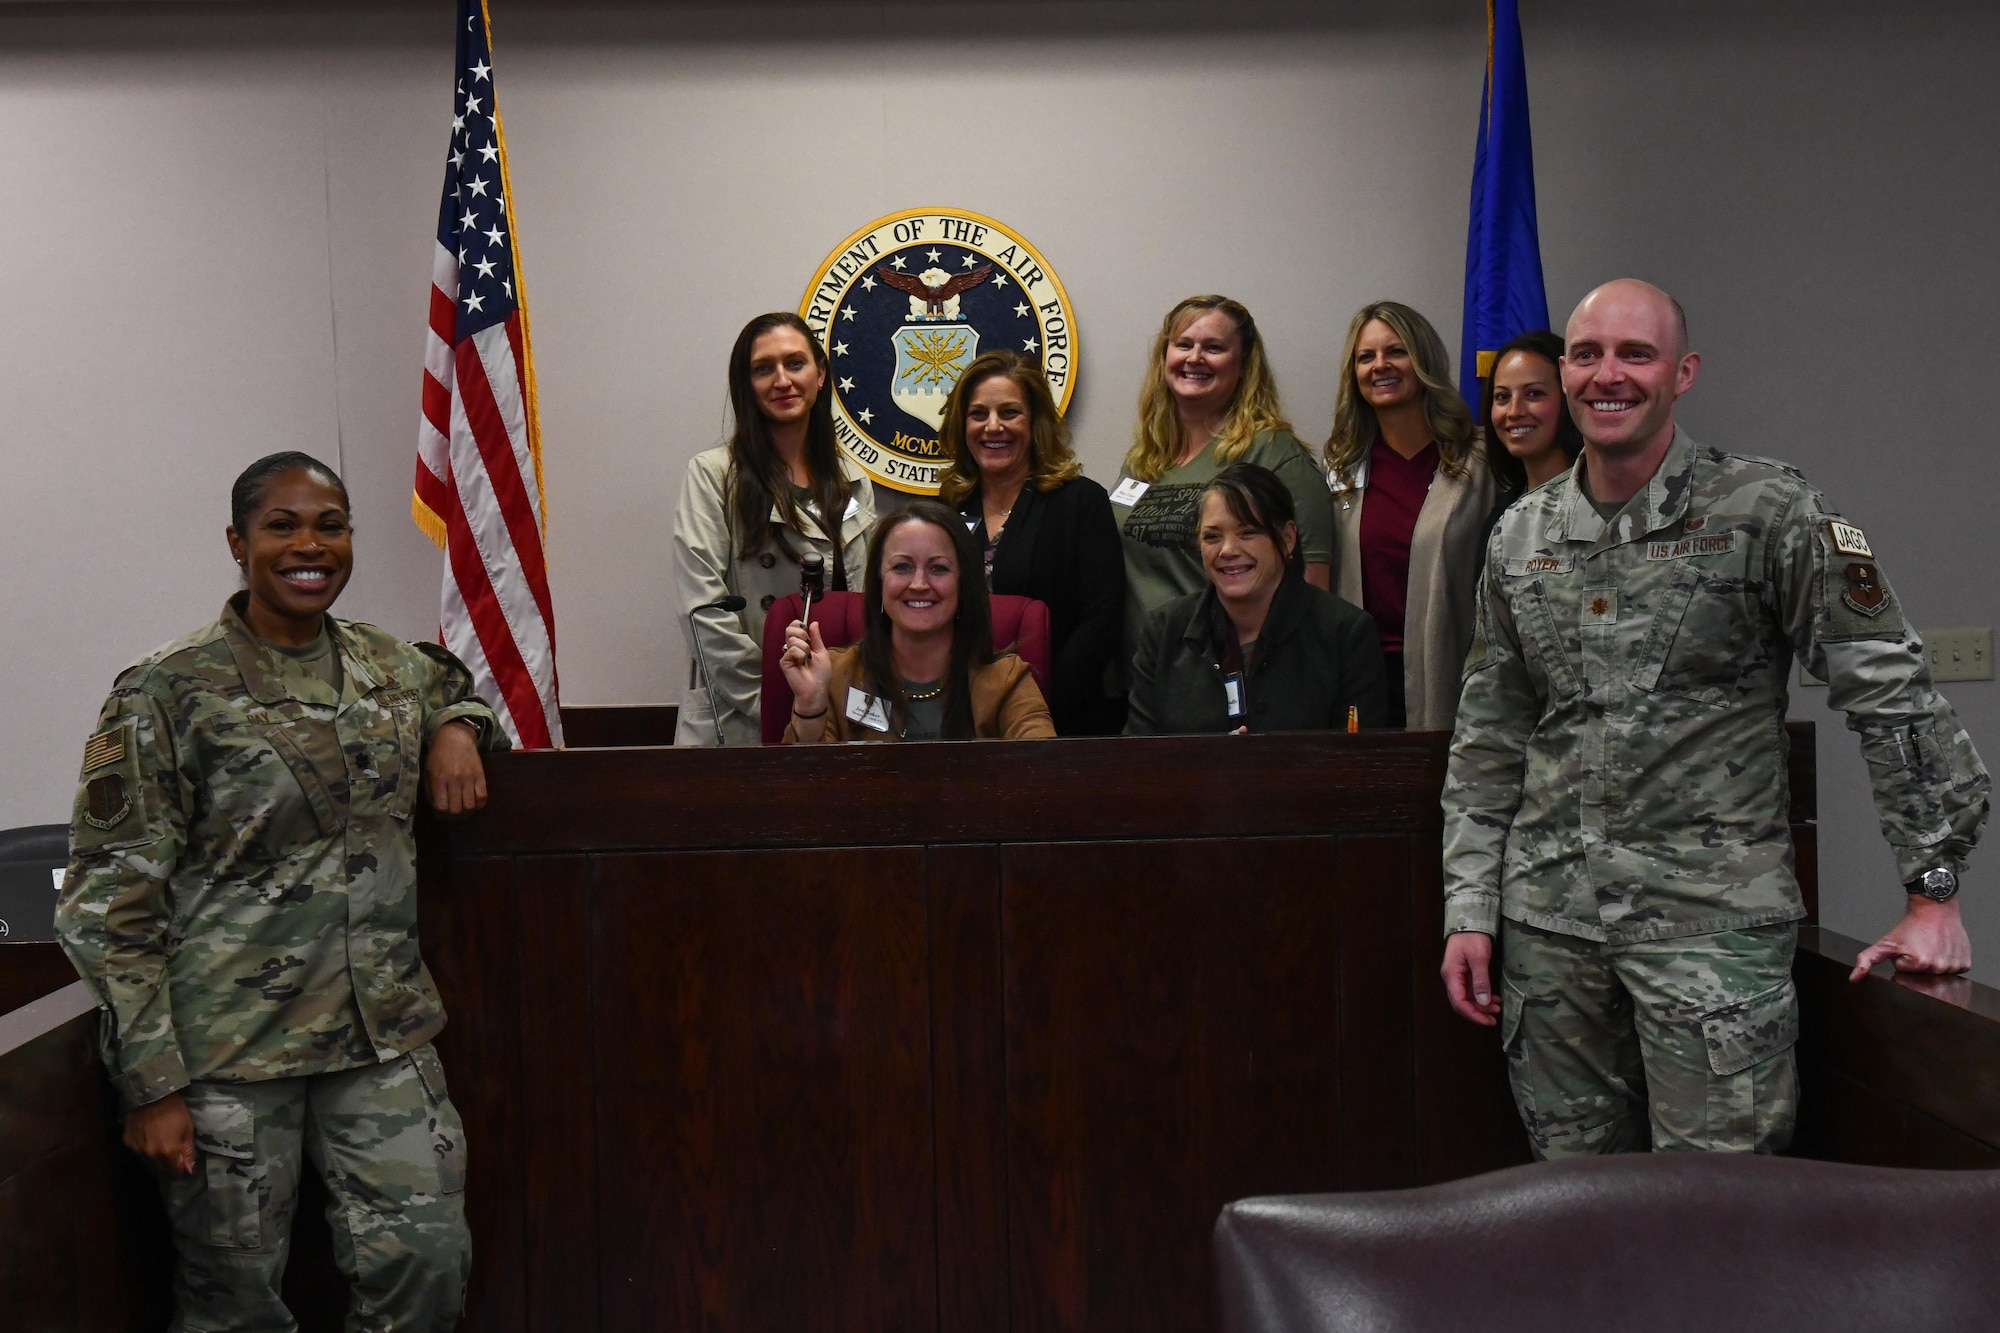 Leadership spouses from the 97th Air Mobility Wing pose for a photo with members of the 97th Air Mobility Wing Judge Advocate staff at Altus Air Force Base, Oklahoma, Oct. 19 2022. The Judge Advocate Office staff offers free professional legal advice concerning a wide range of civil legal matters. (U.S. Air Force photo by Airman 1st Class Miyah Gray)